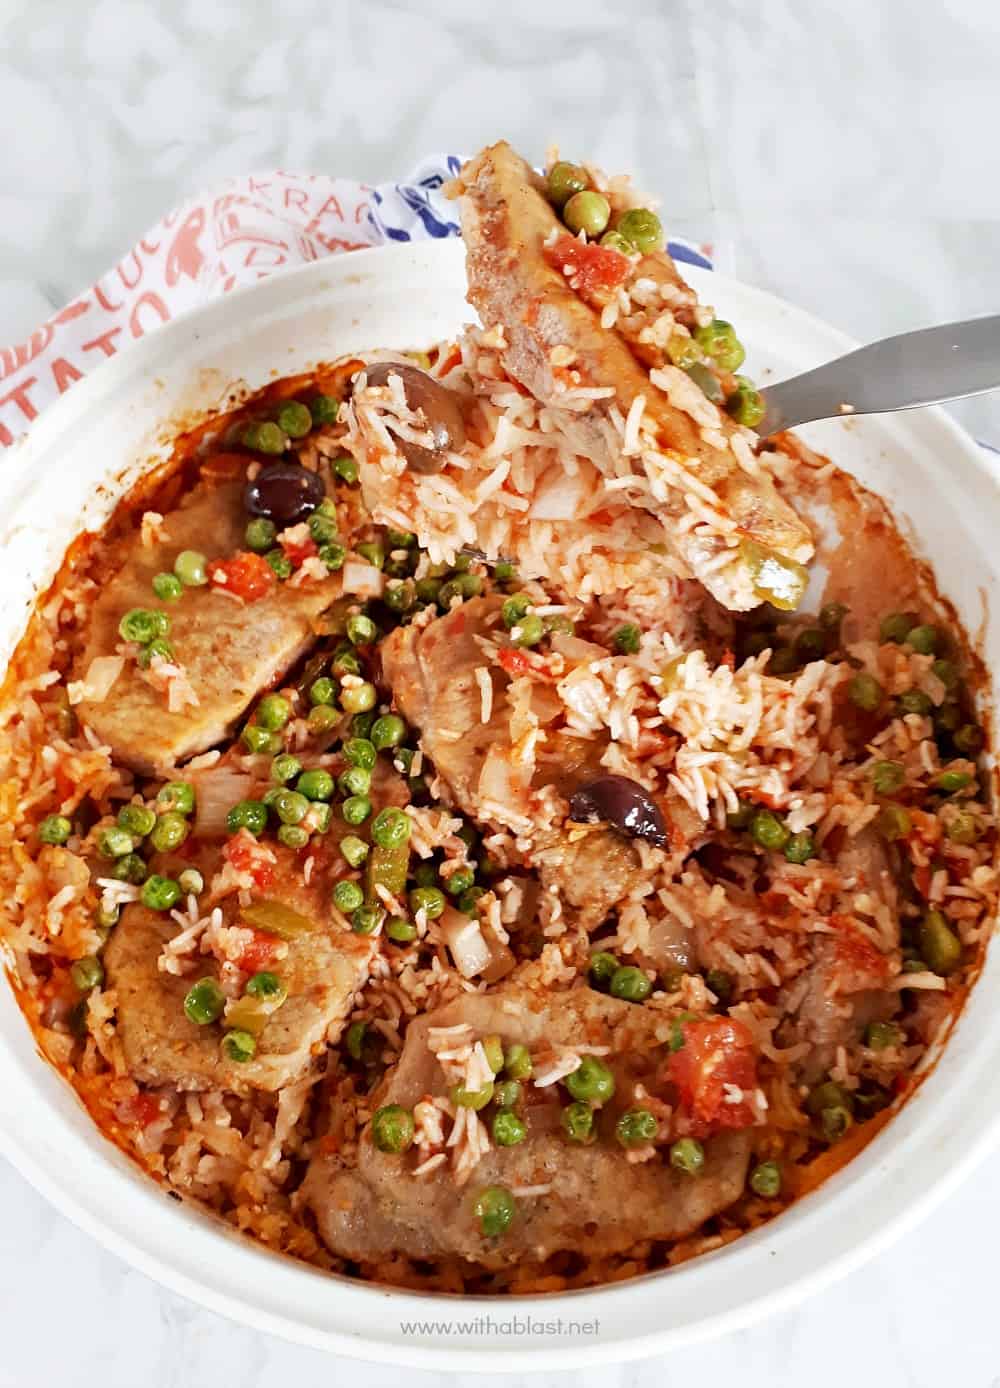 One-Pot Pork Chop and Rice Casserole is an all in one Dinner with tender, juicy Pork Chops, vegetables and tomato rice [easy oven baked recipe]